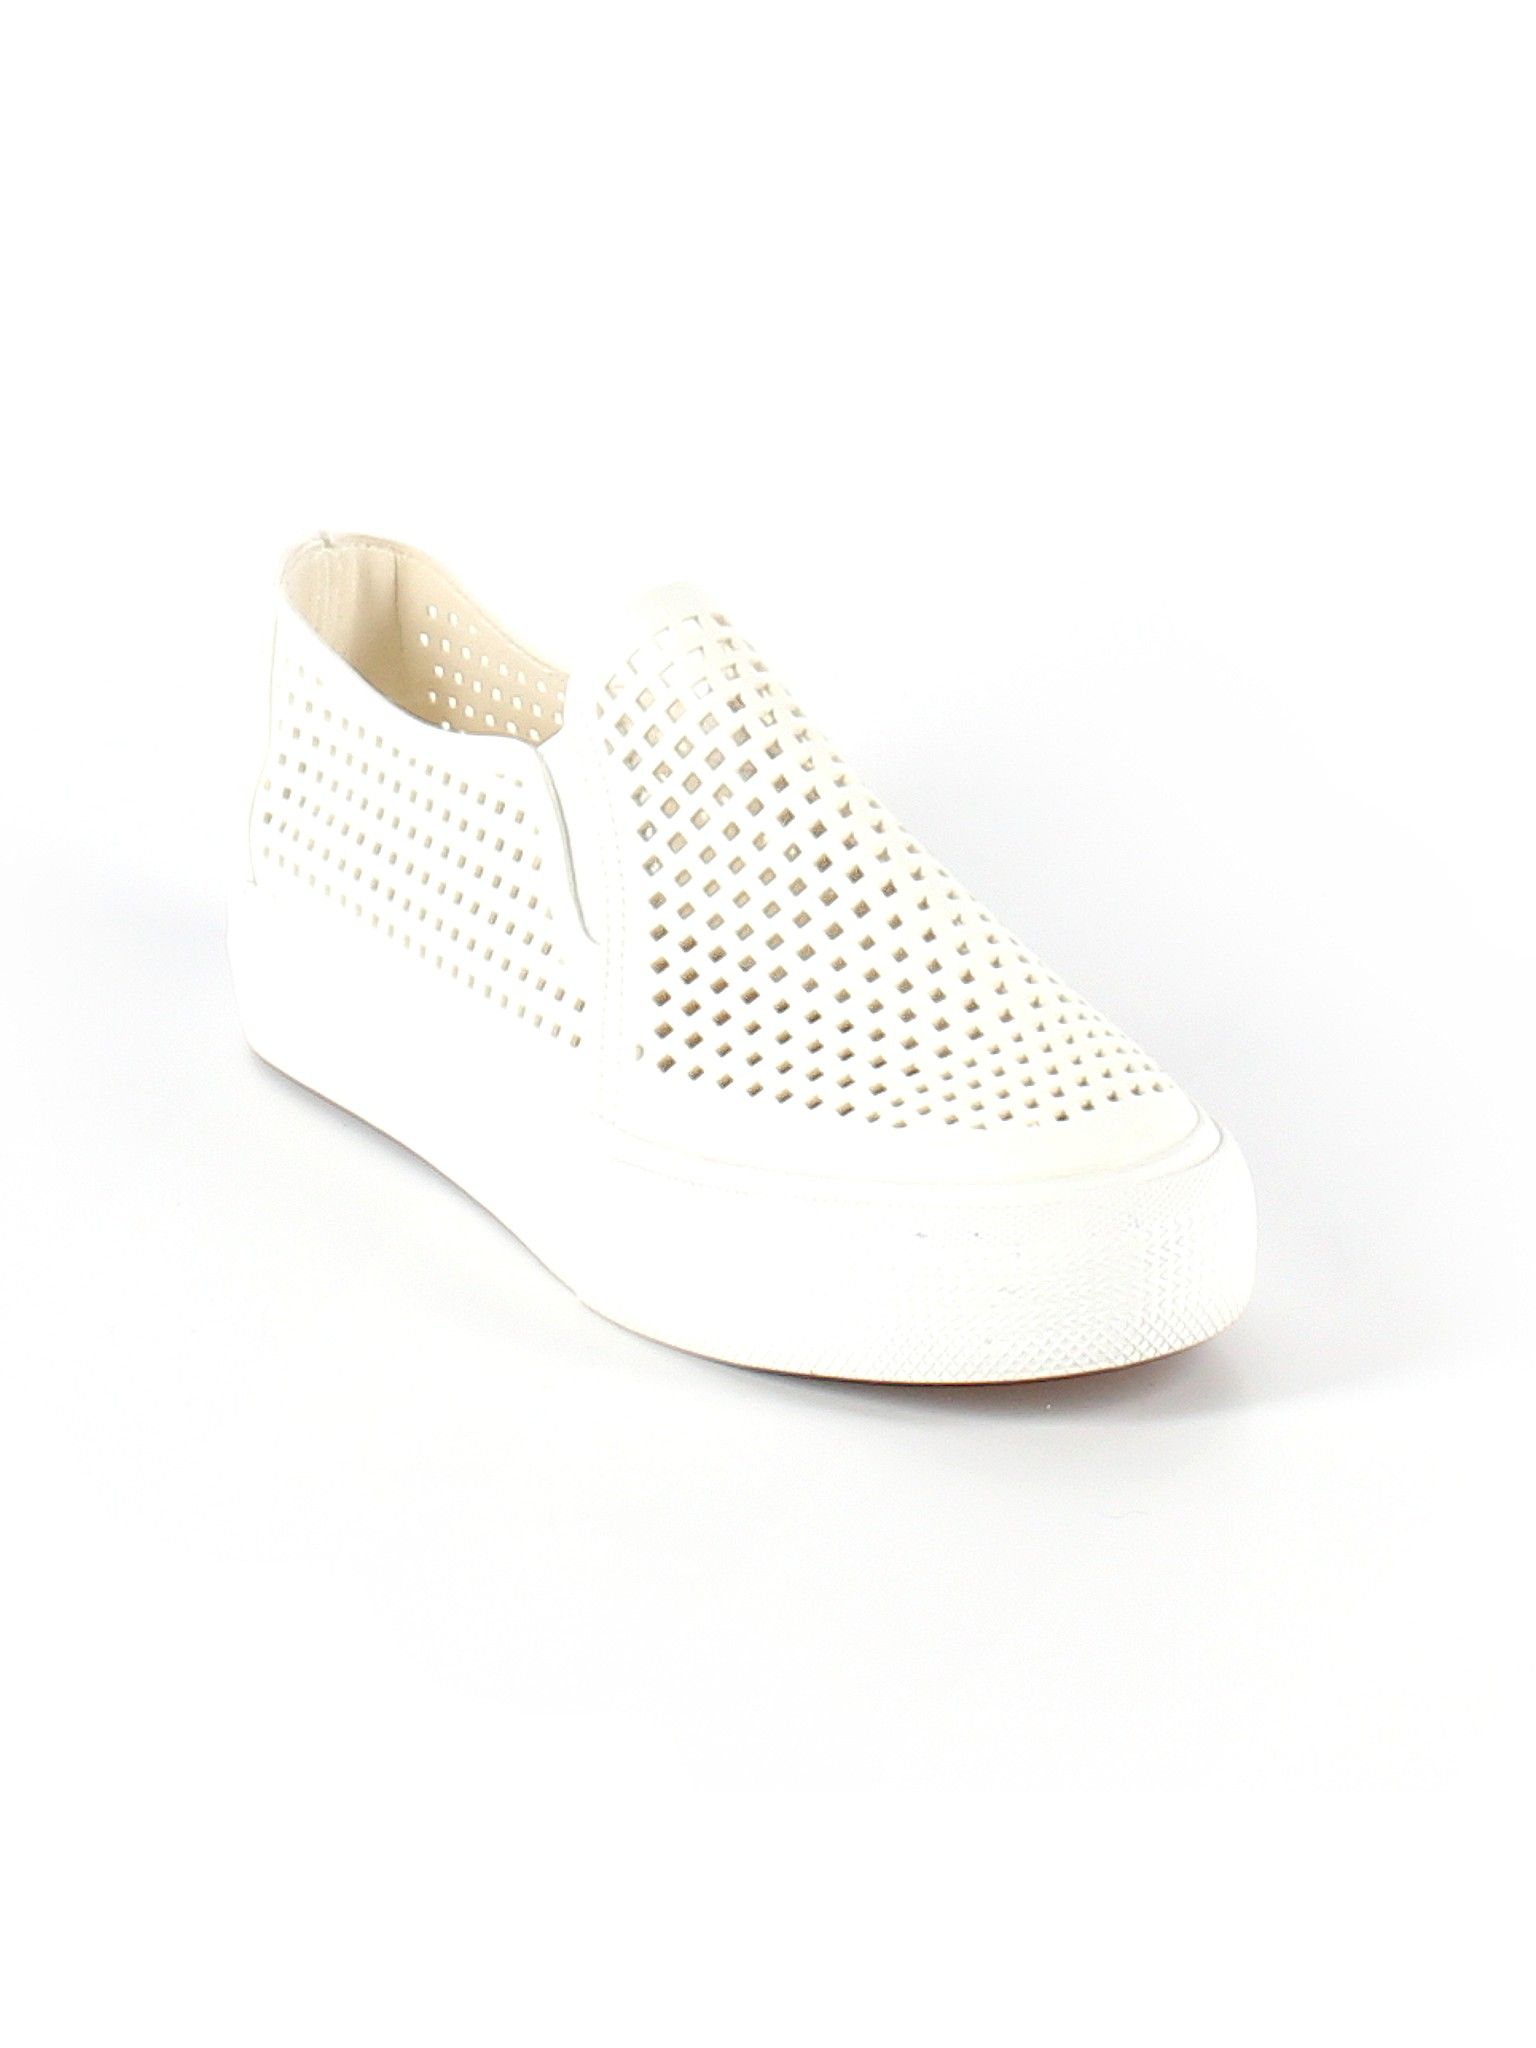 Restricted Shoes Sneakers Size 8: White Women's Clothing - 45429542 | thredUP